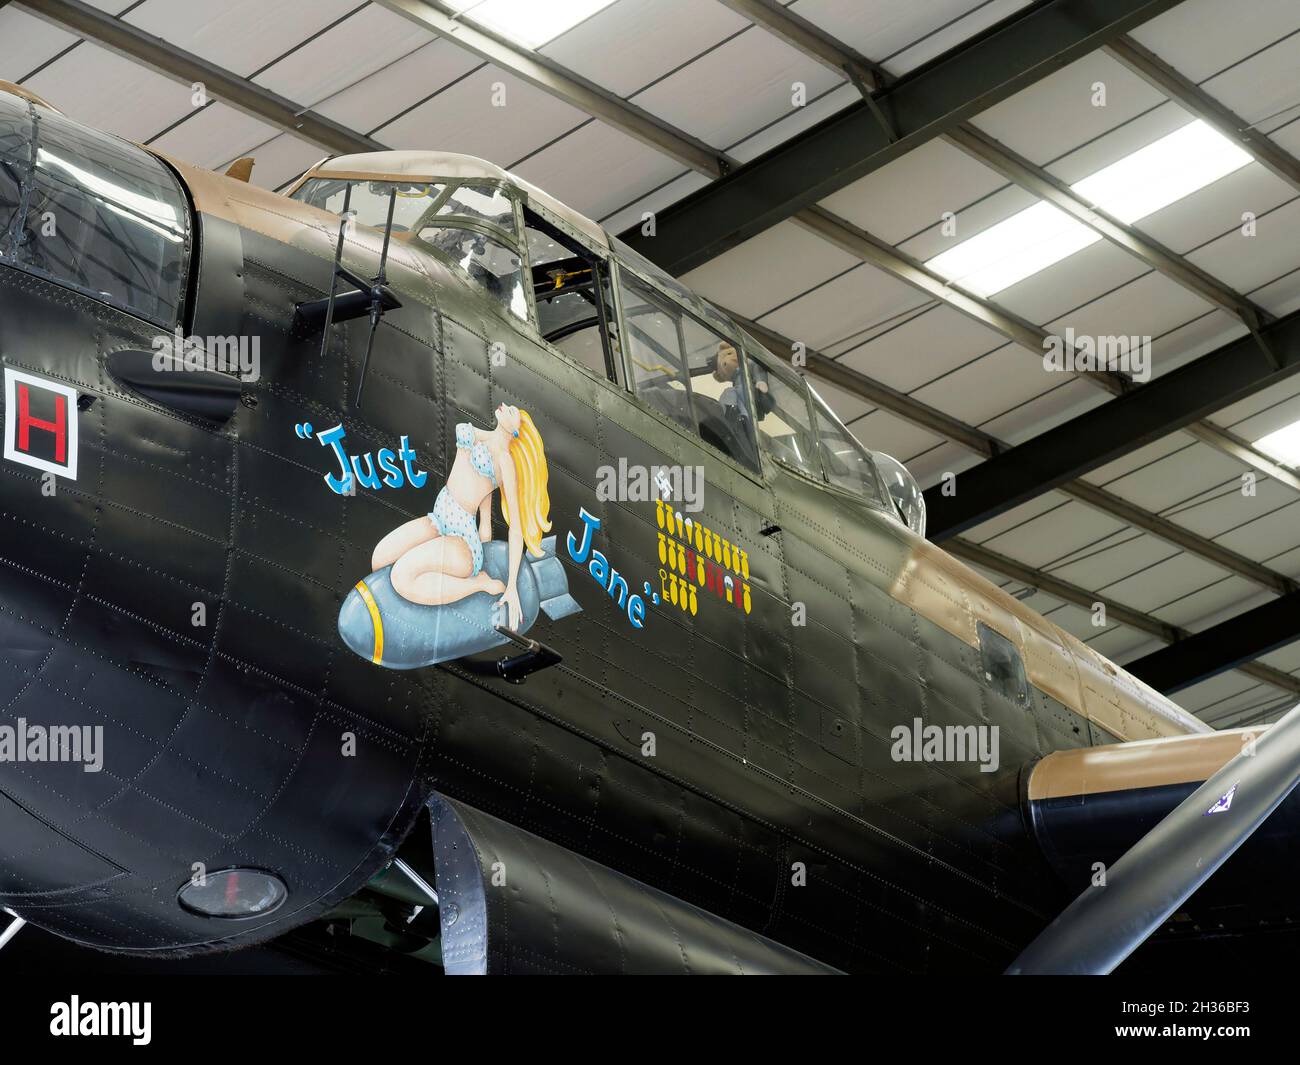 Nose art on Avro Lancaster NX611 'Just Jane' ujnder restoration at the Lincolnshire Aviation Heritage Centre, East Kirkby Airfield near Spilsby. Stock Photo